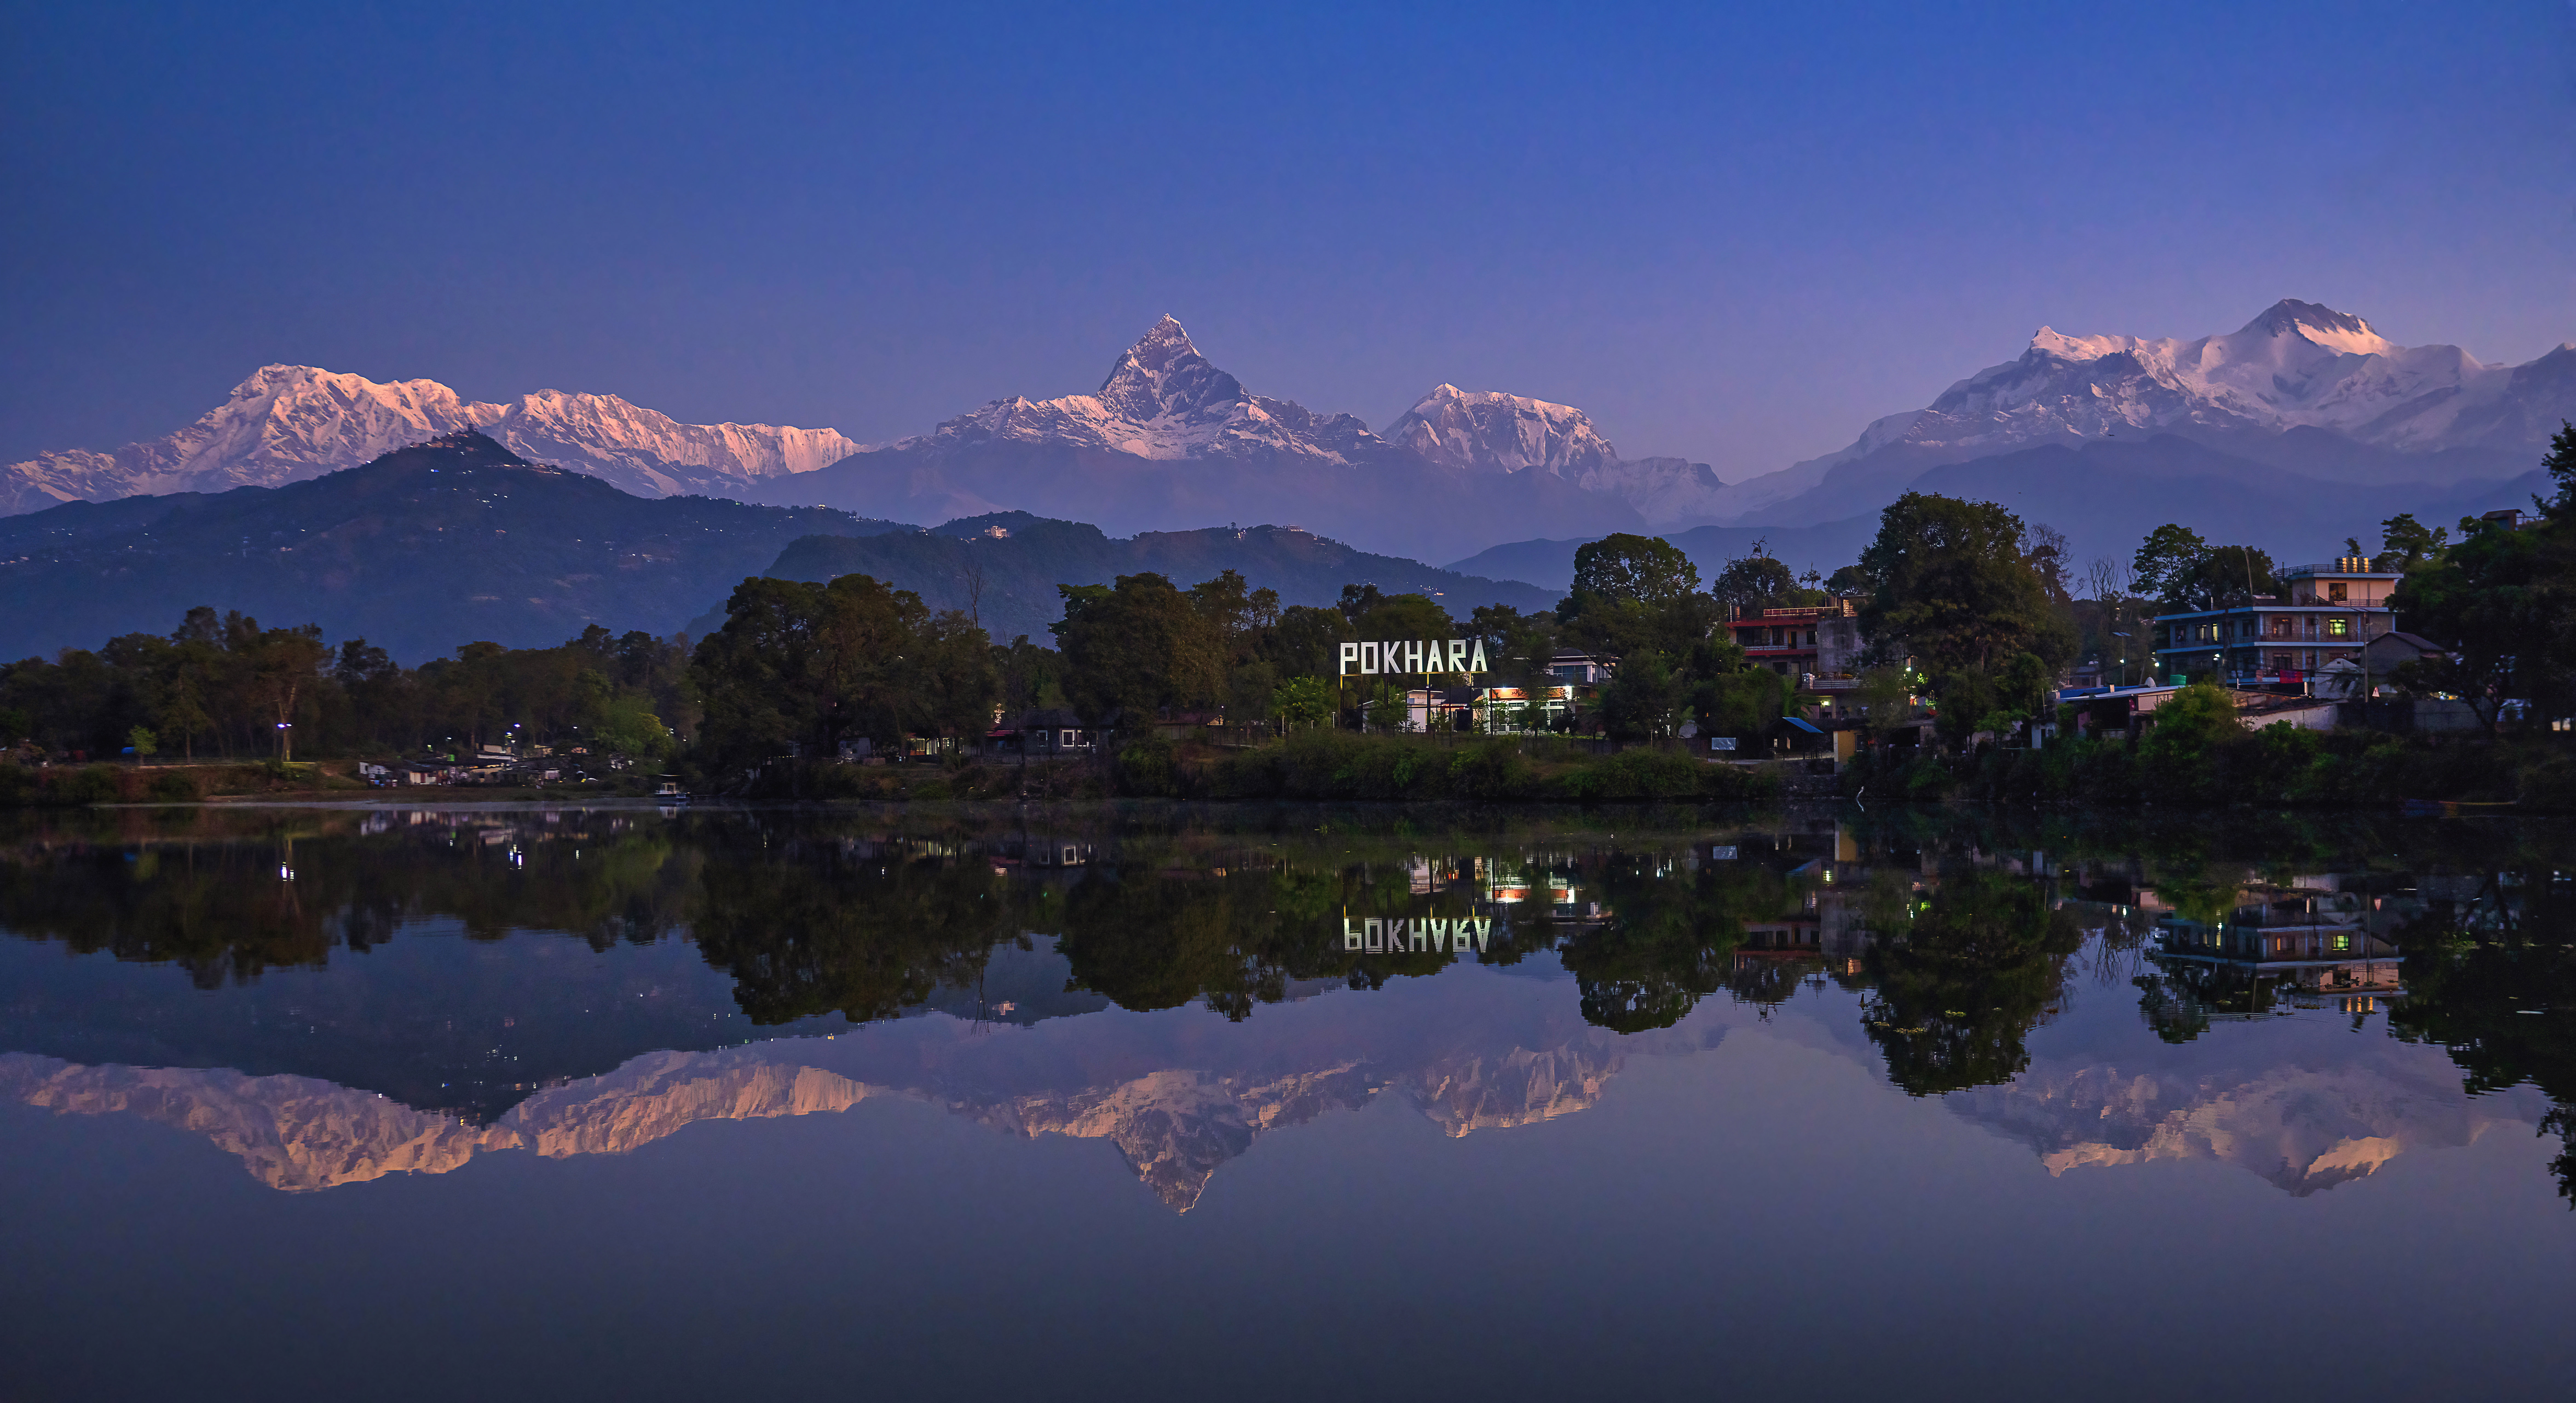 30 Minutes flight or 6 hrs drive to Pokhara & Check in Hotel (B)'